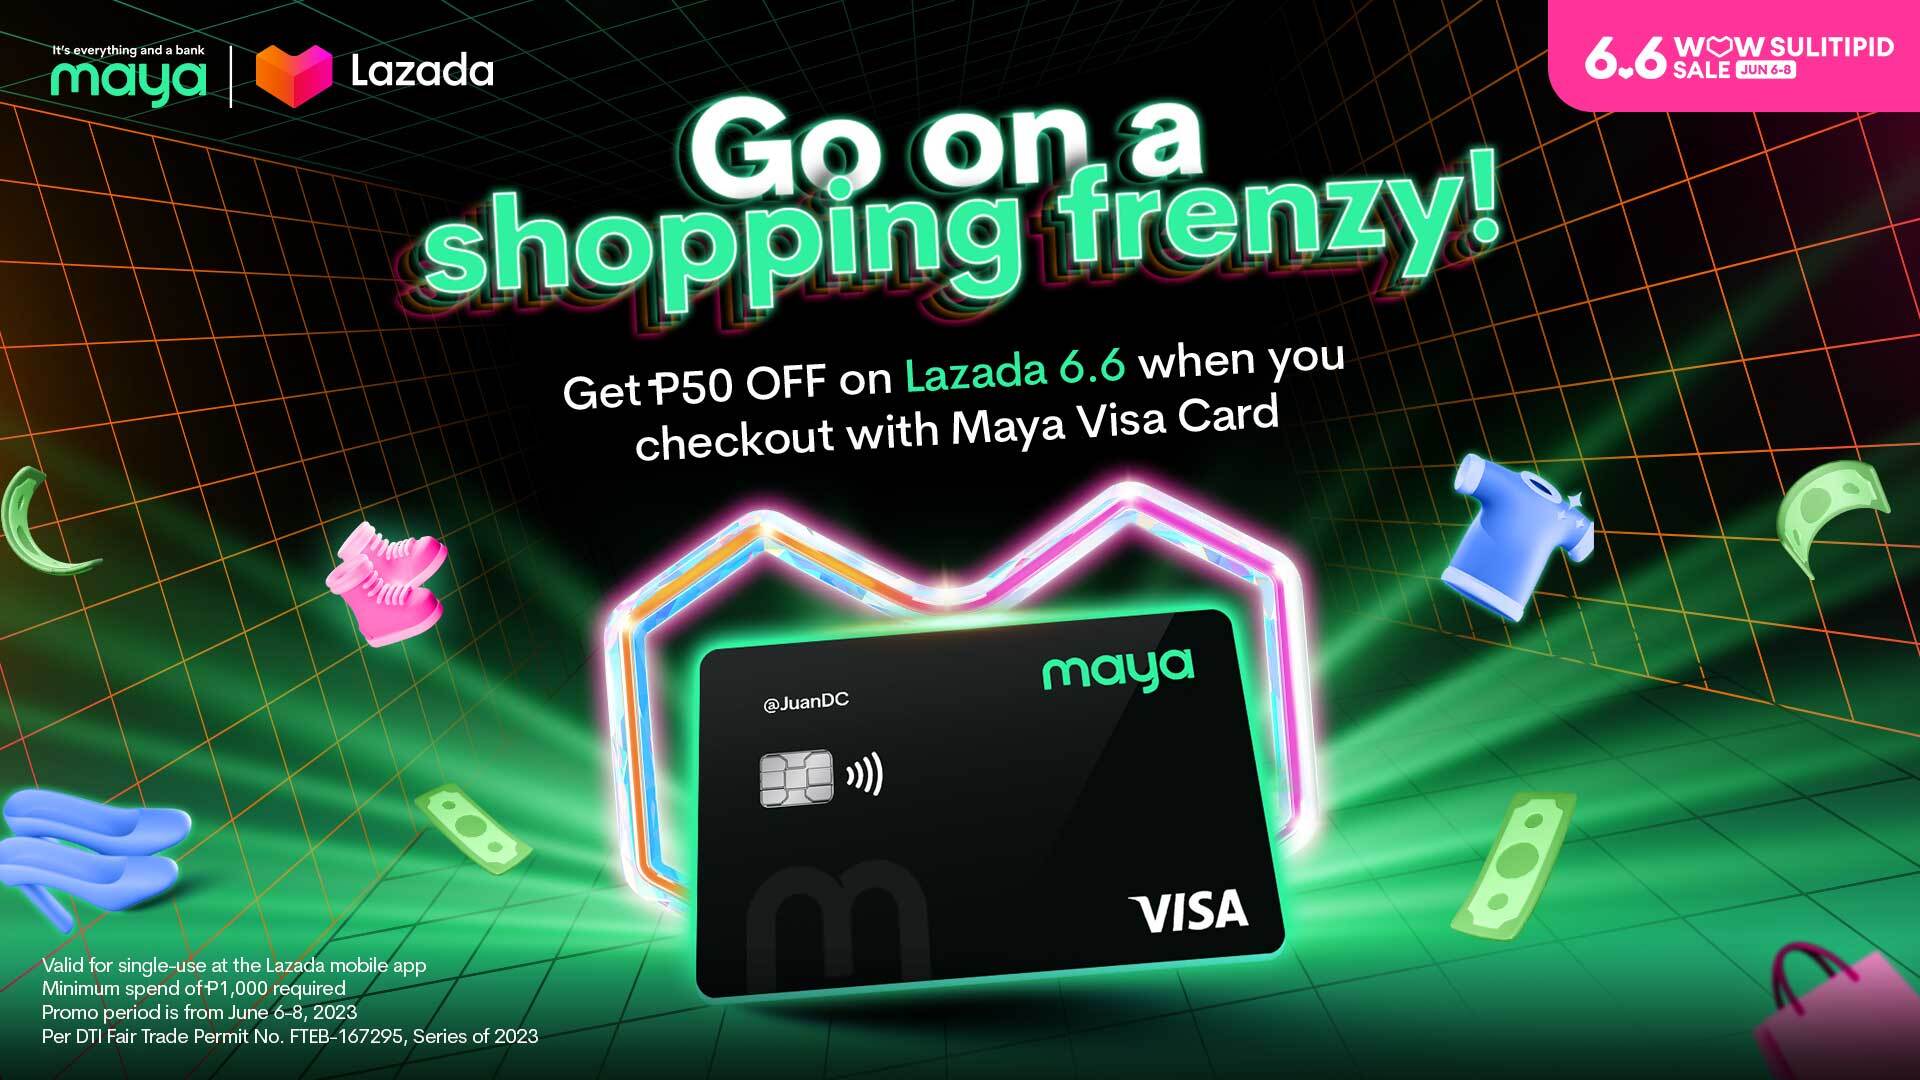 Get instant P50 OFF on Lazada with your Maya Visa Card!